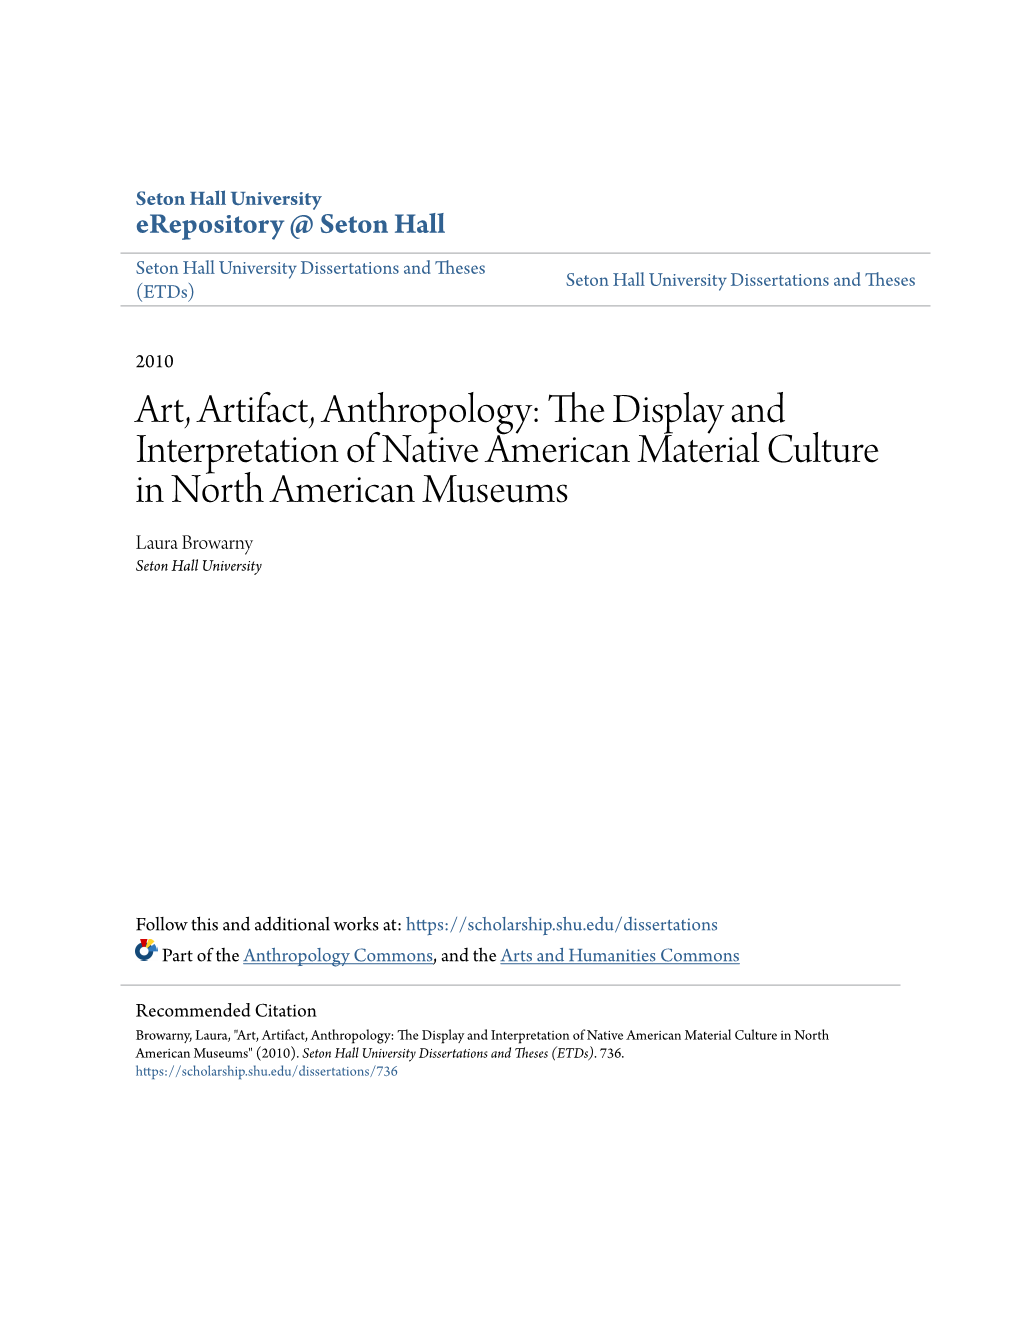 Art, Artifact, Anthropology: the Display and Interpretation of Native American Material Culture in North American Museums Laura Browarny Seton Hall University